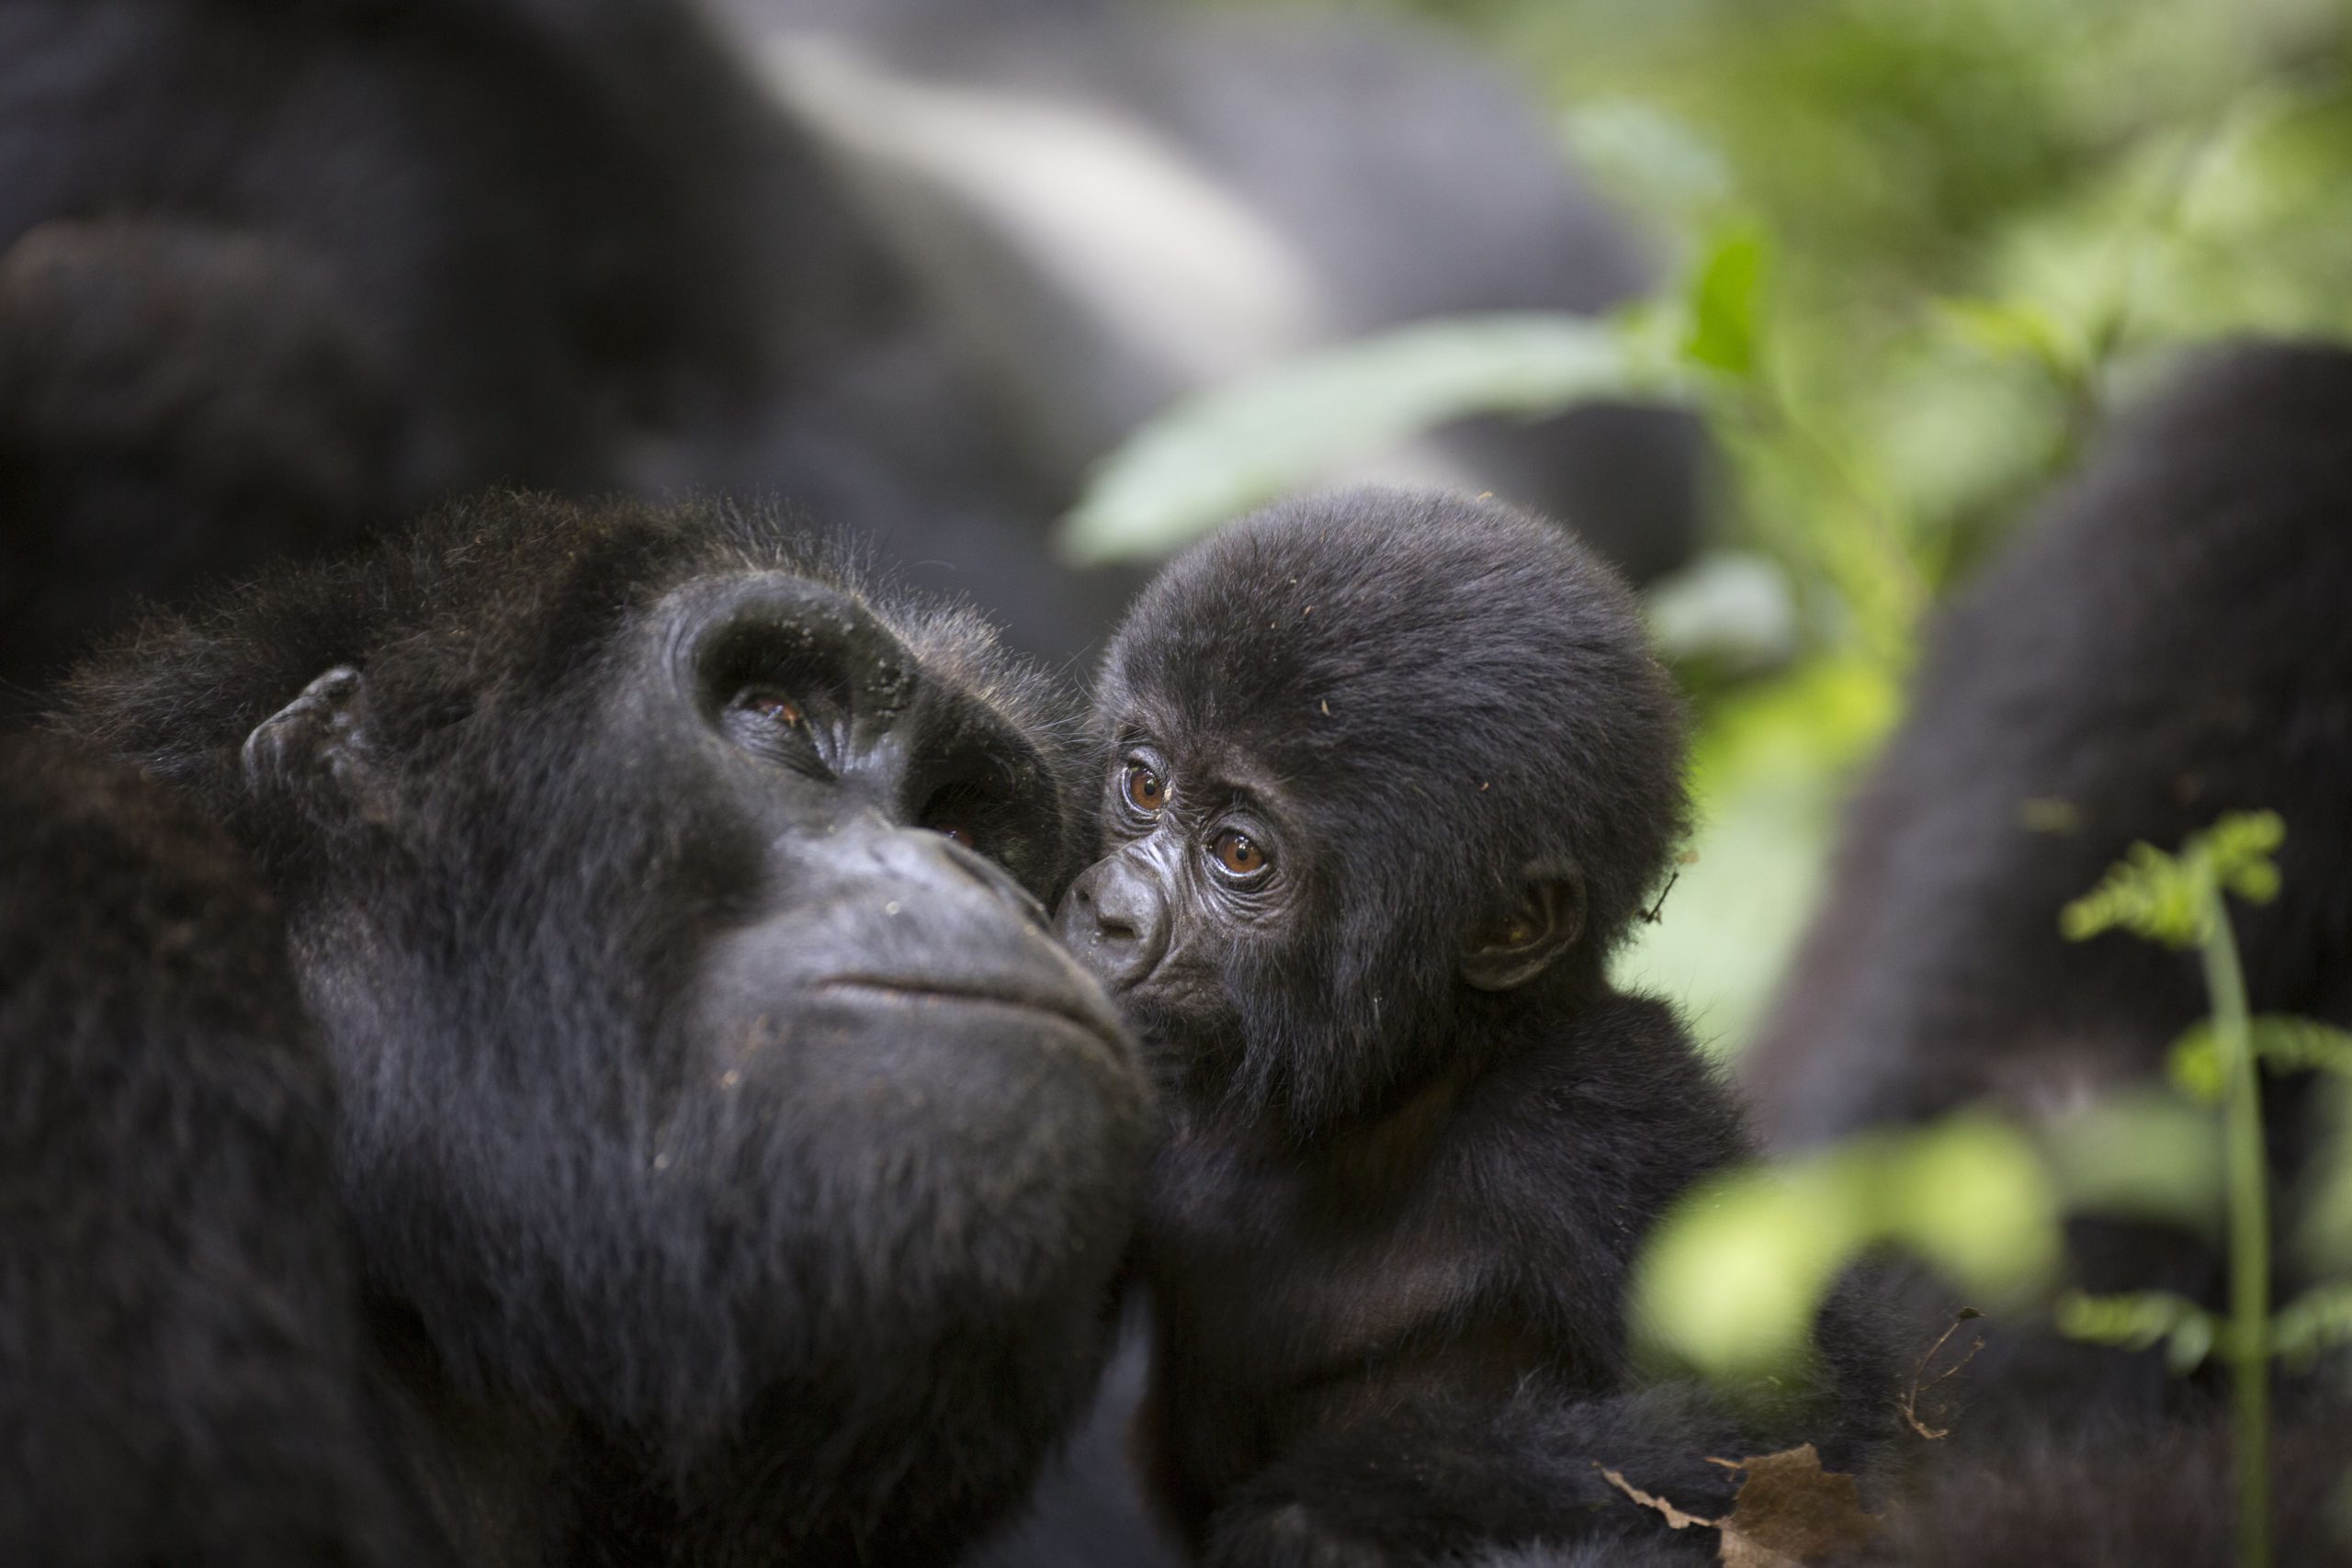 3 DAYS 2 NIGHTS IN BWINDI IMPENETRABLE FOREST NATIONAL PARK